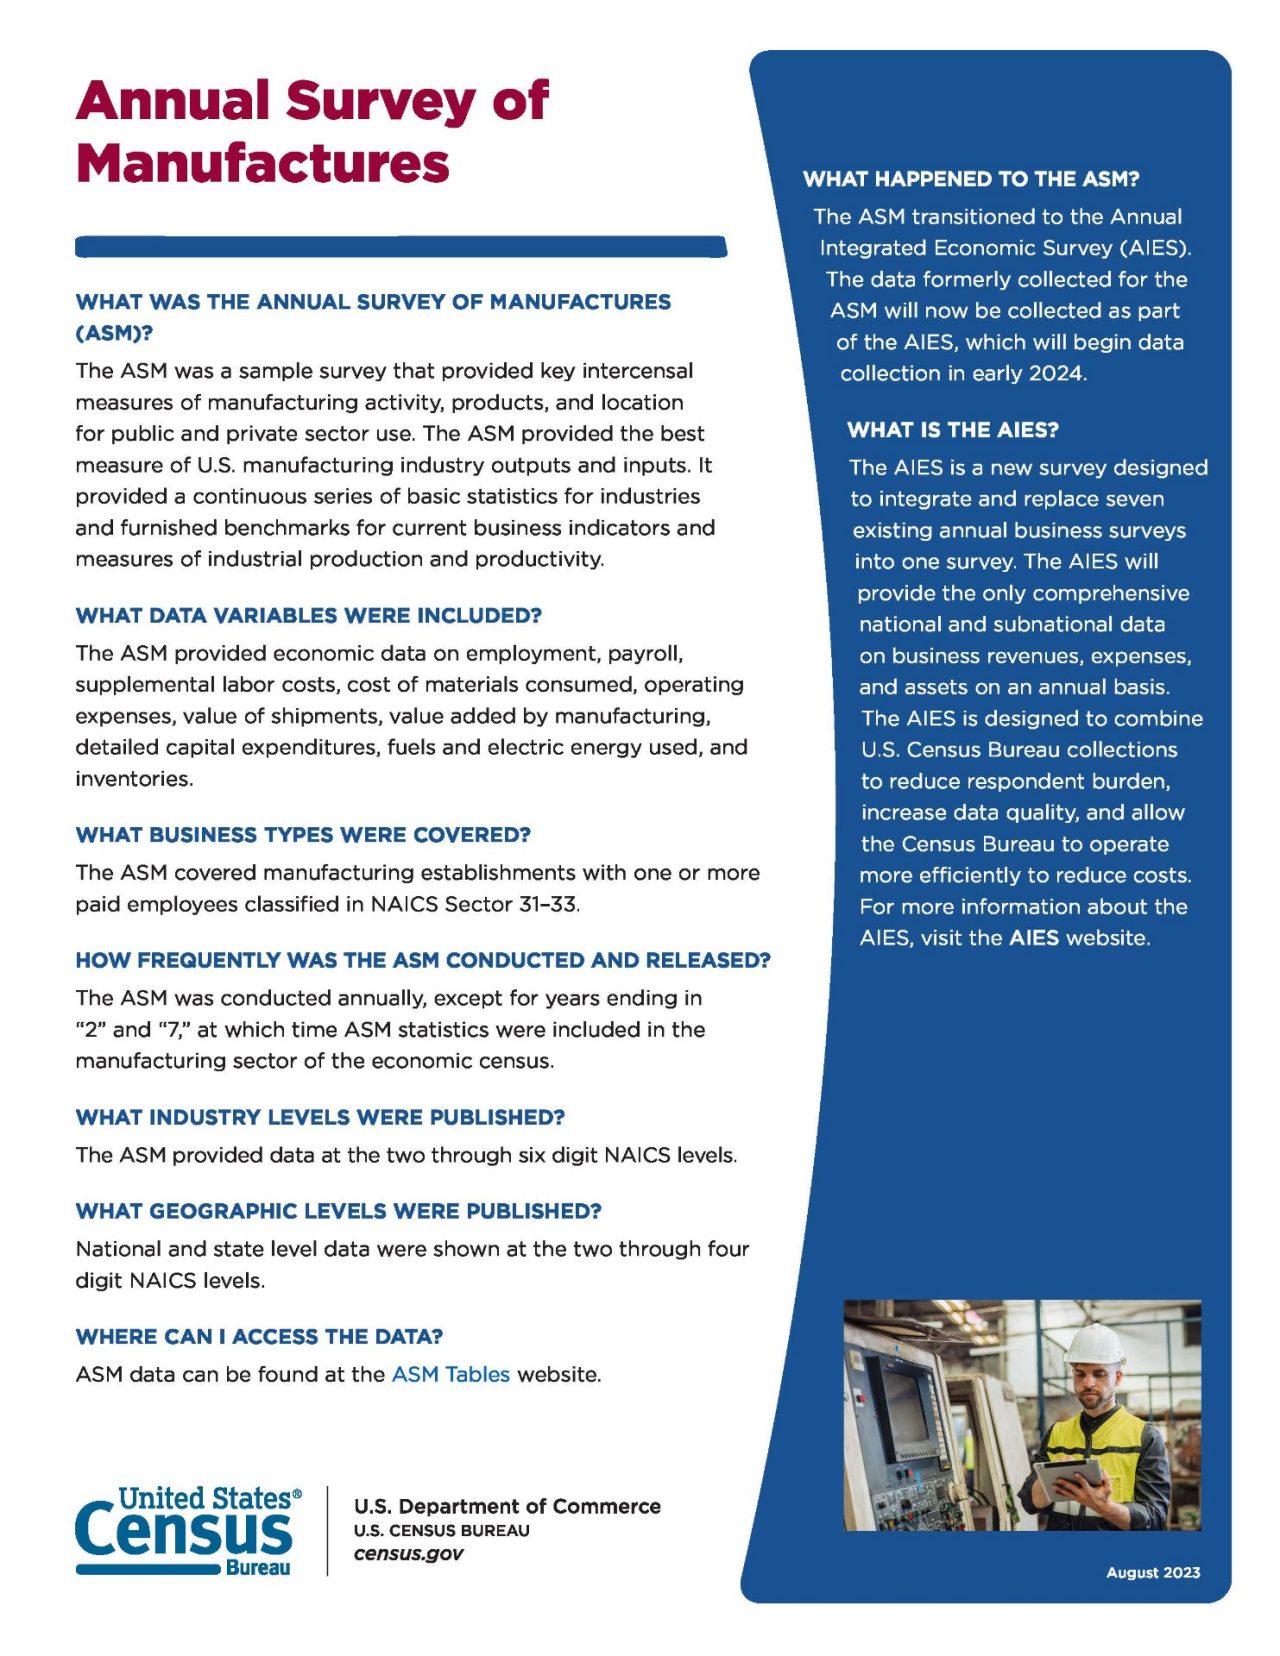 Annual Survey of Manufactures Page 1